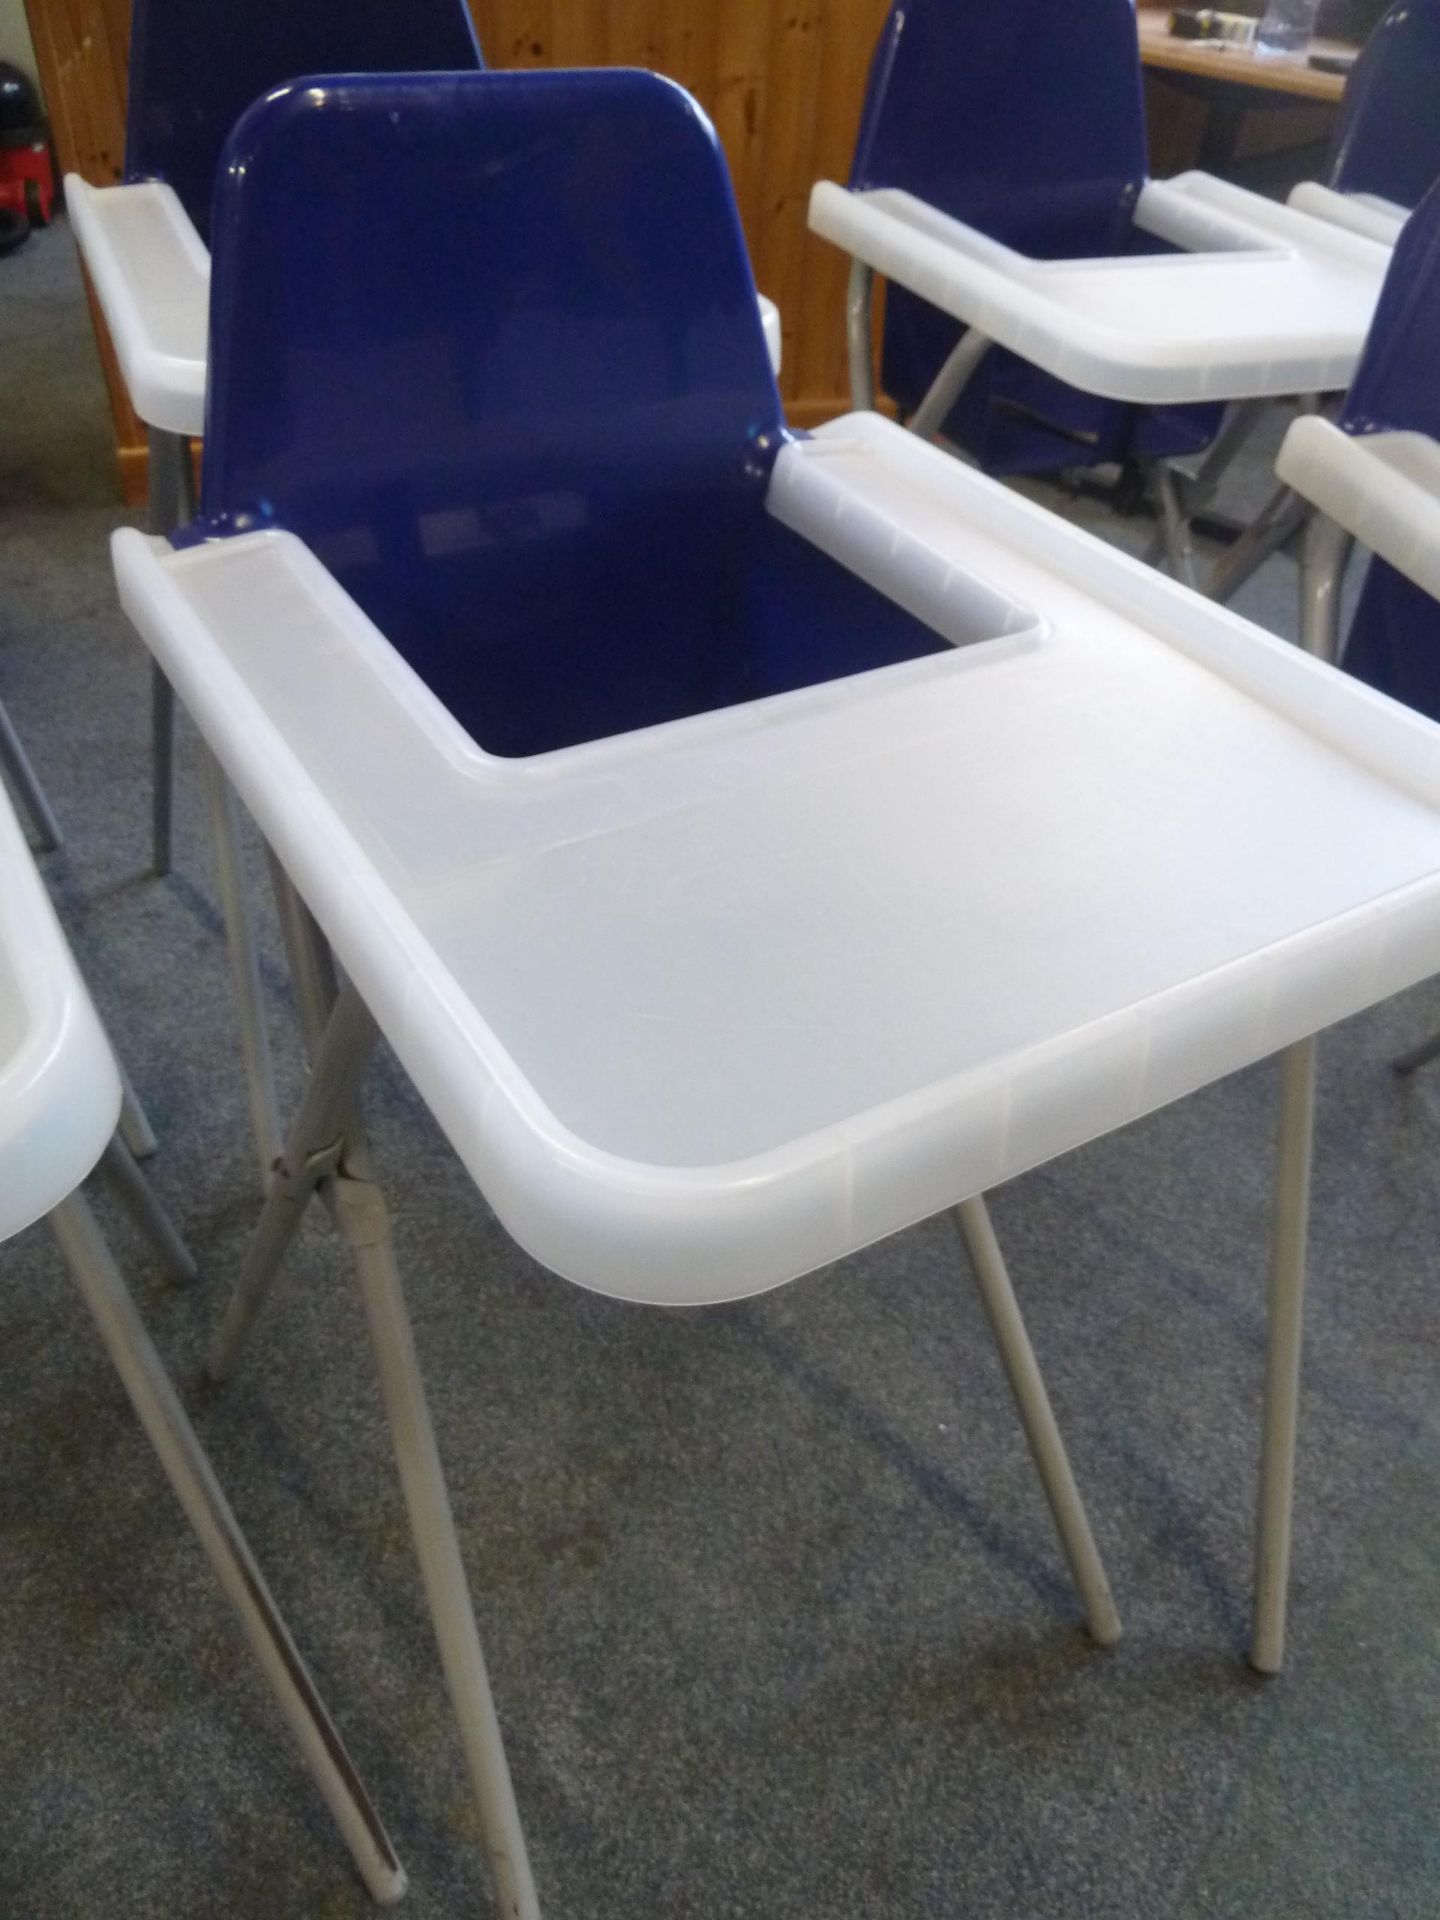 *4 x high chairs - plastic seat and tray with metal x-frame legs - Image 2 of 3